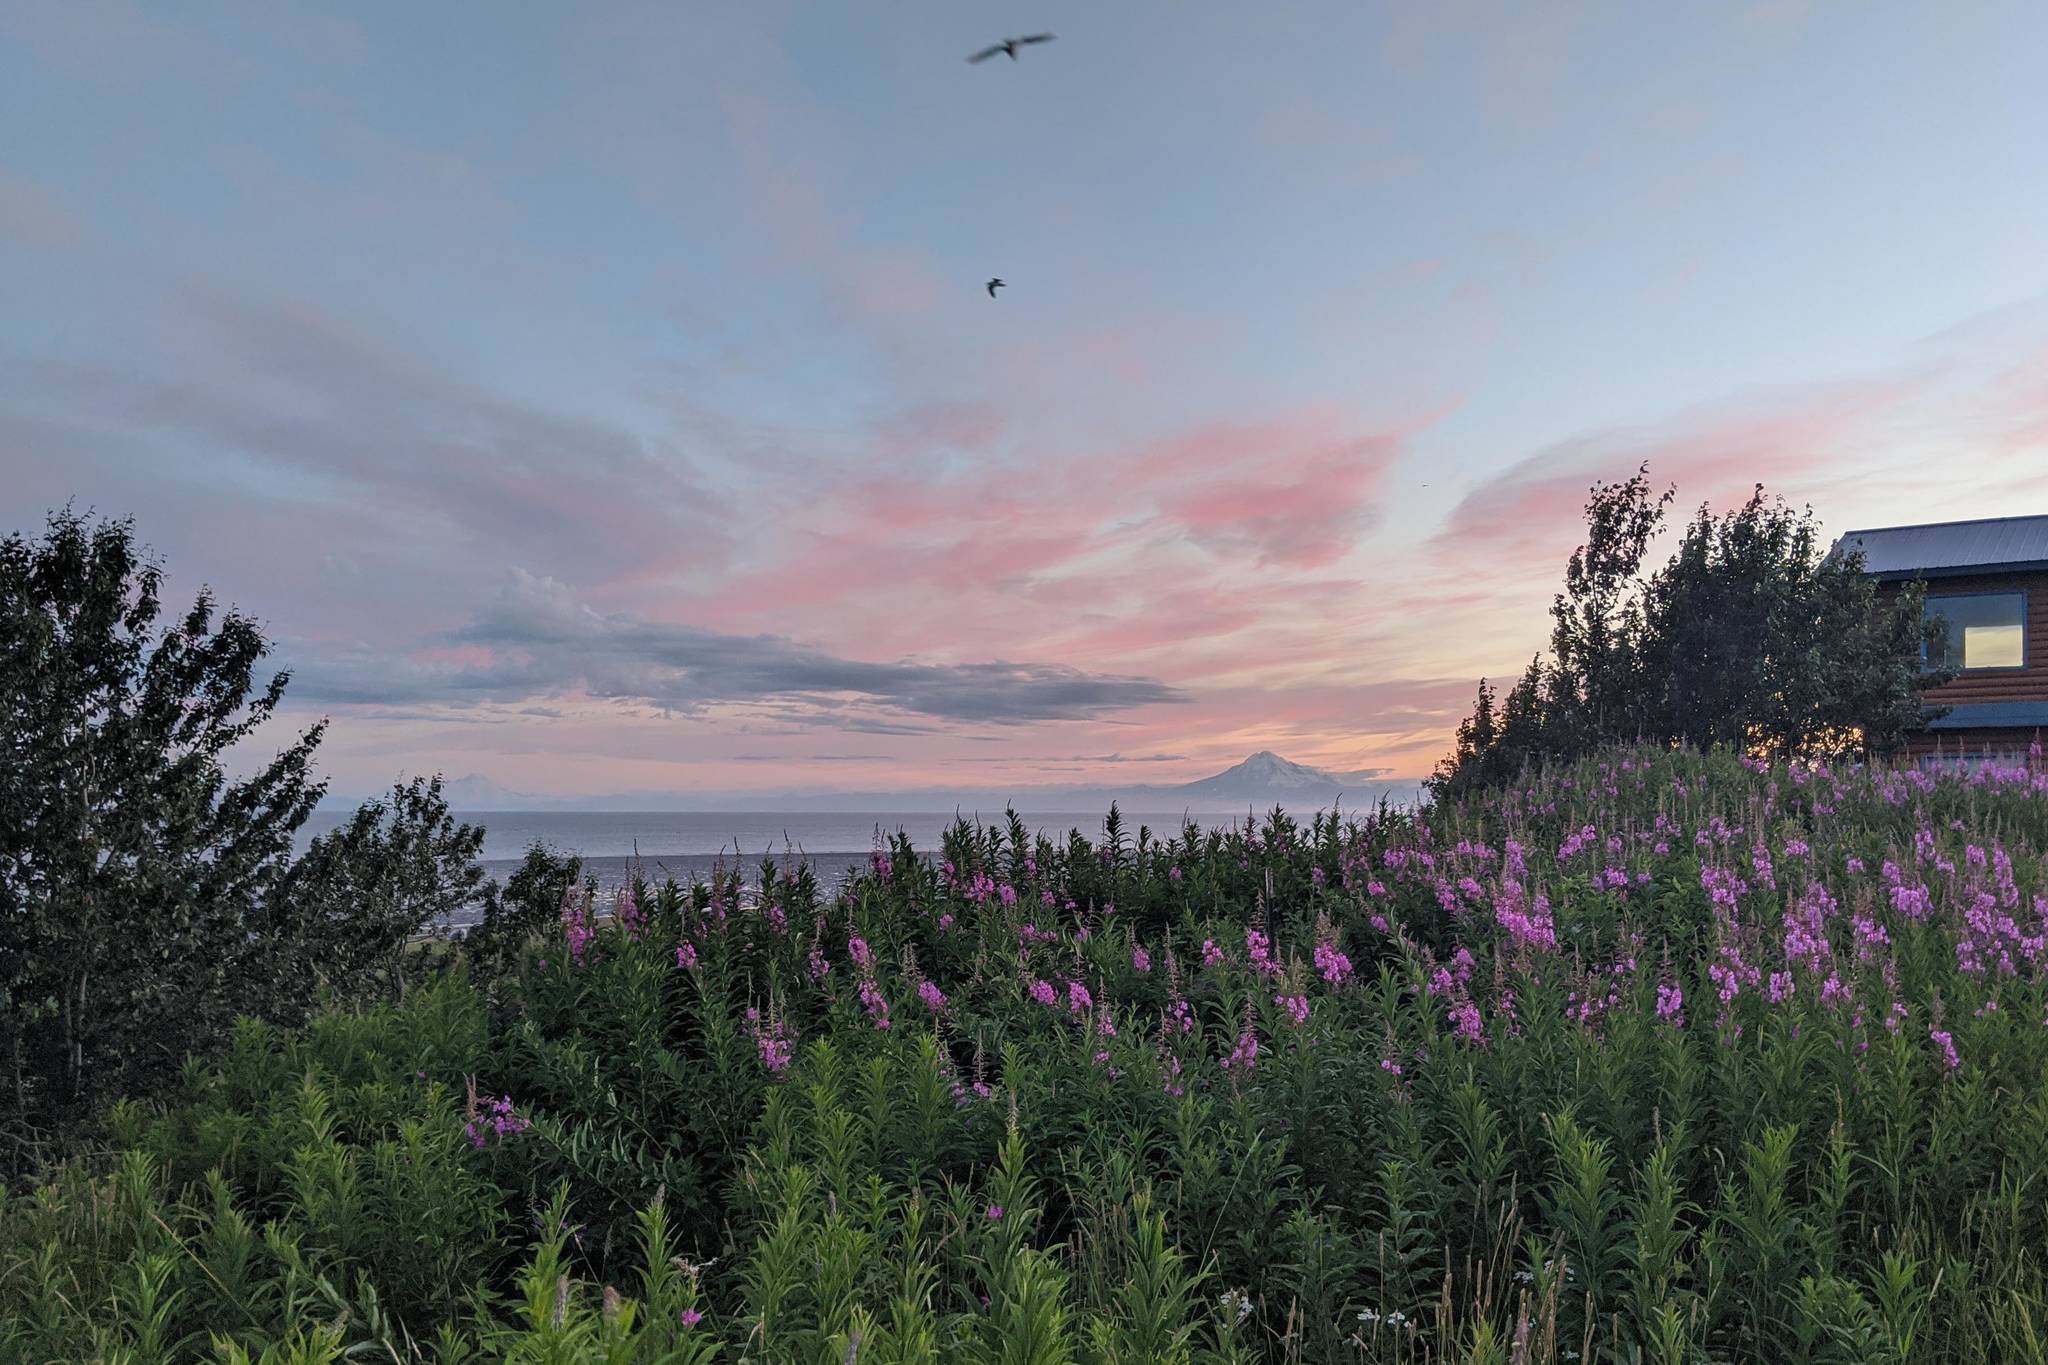 Mount Redoubt is seen from the Kenai Bluff on July 20, 2020, in Kenai, Alaska. (Clarion file)